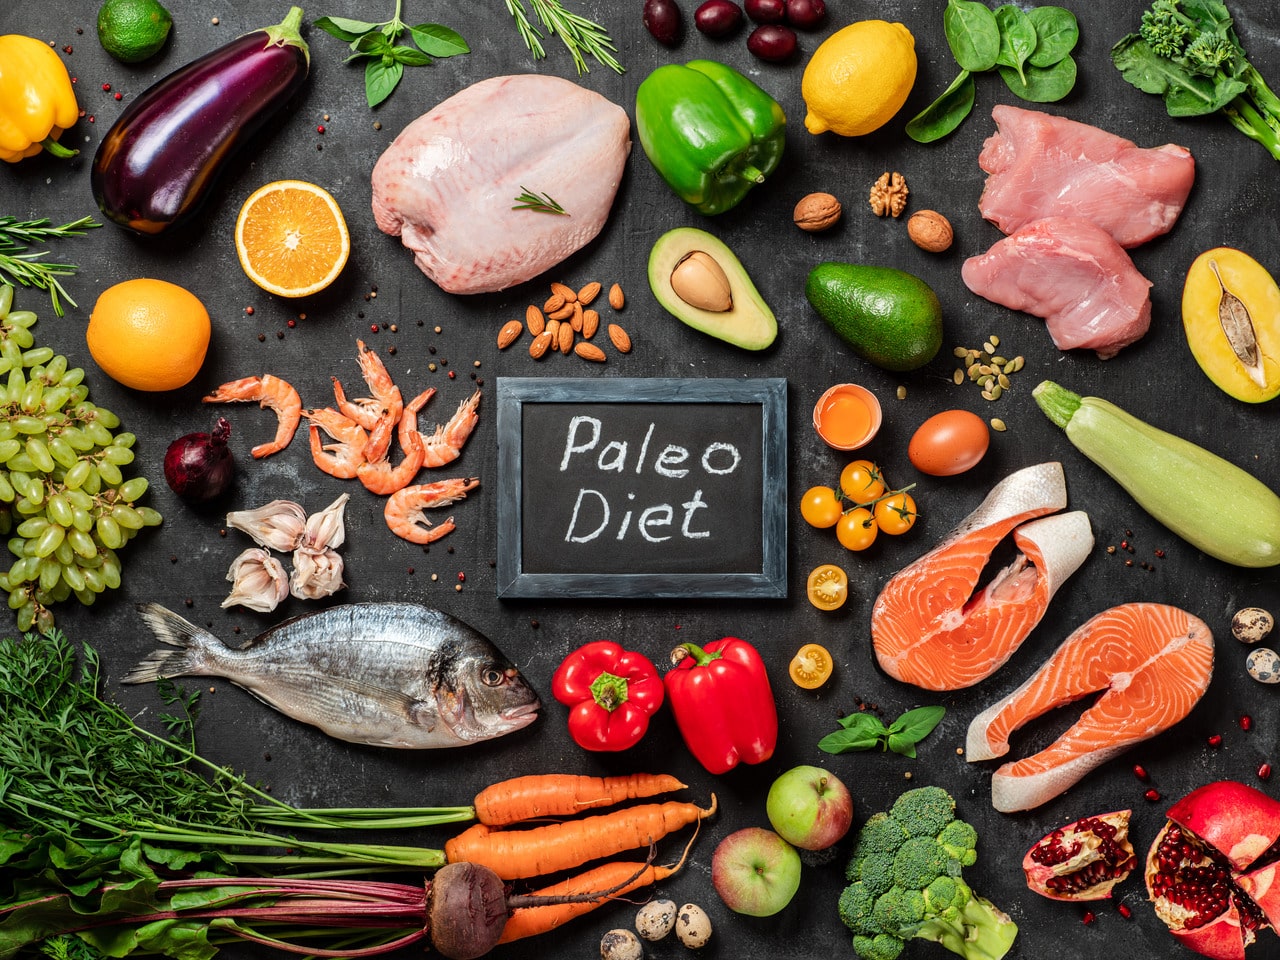 Paleo Diet and Metabolic Health: Does it Help?- HealthifyMe